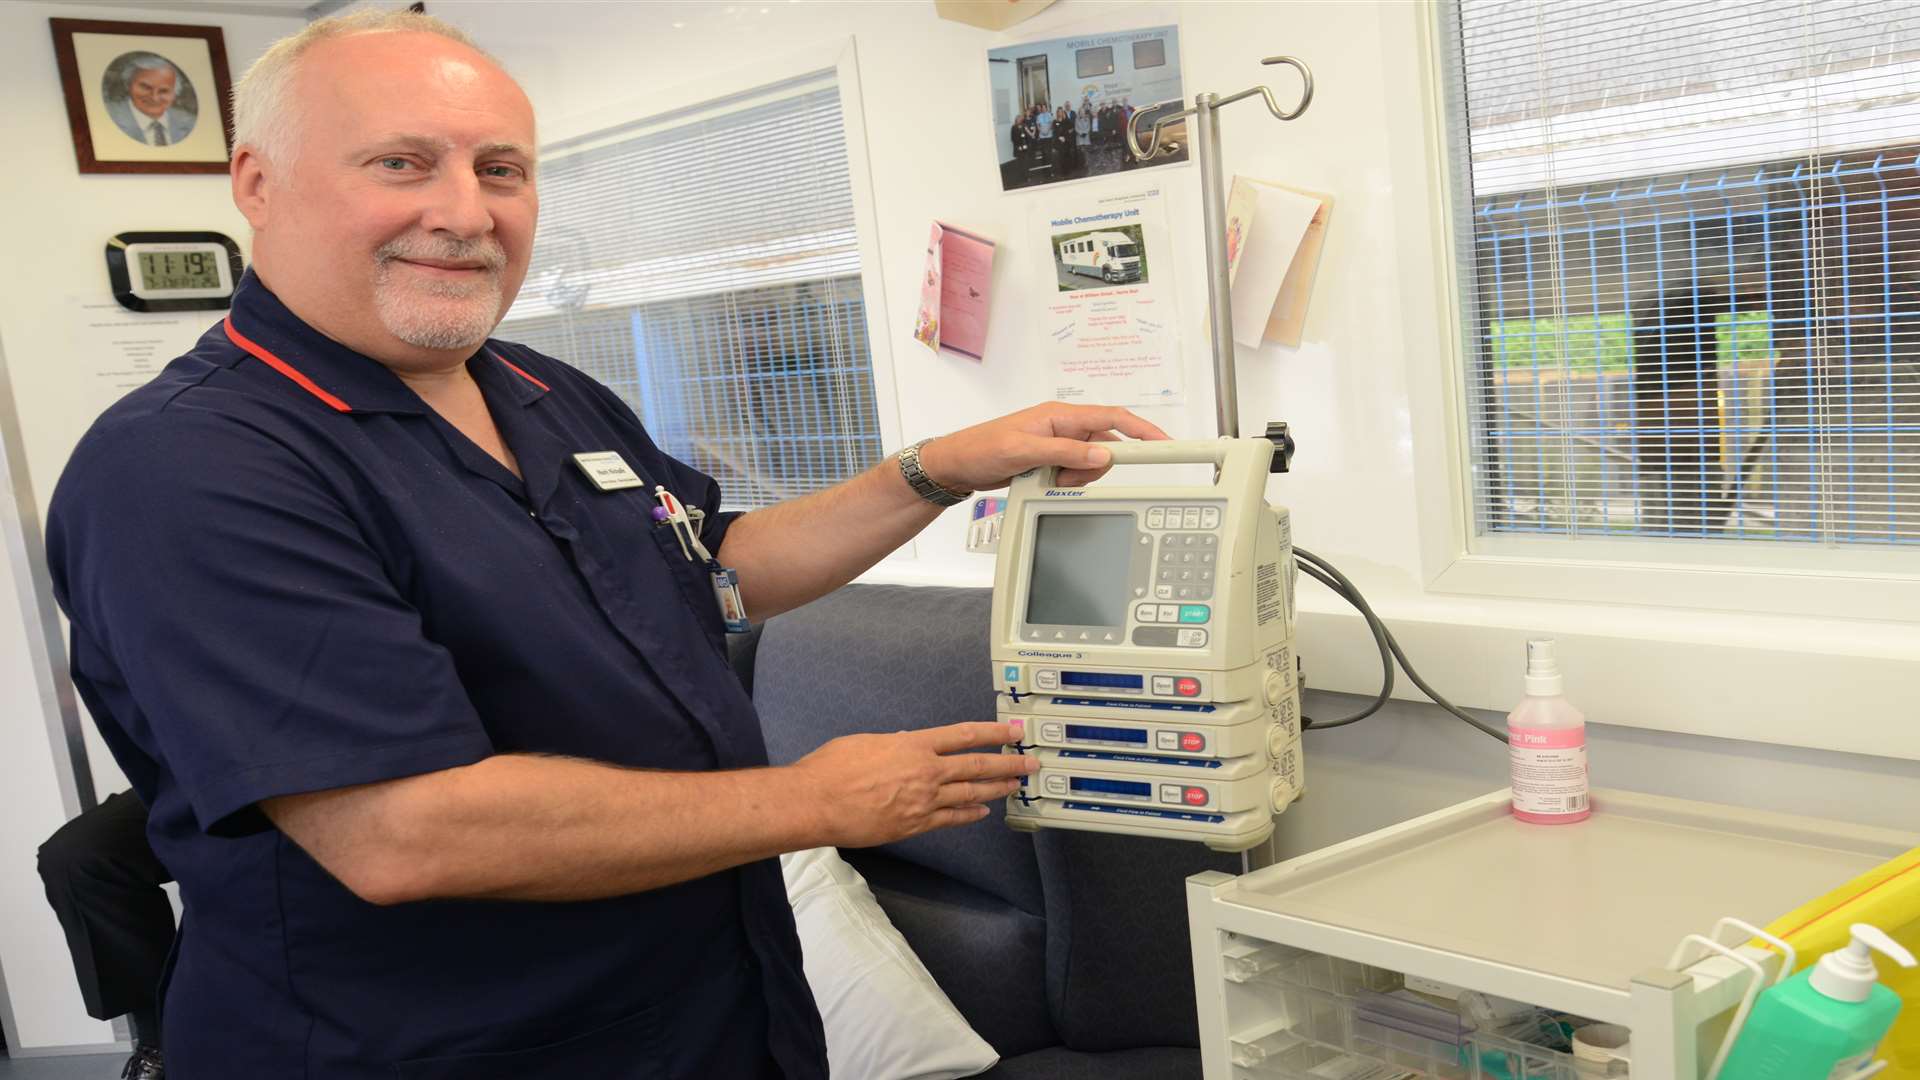 Senior matron Mark Nicholls says patient safety comes first. Picture: Gary Browne